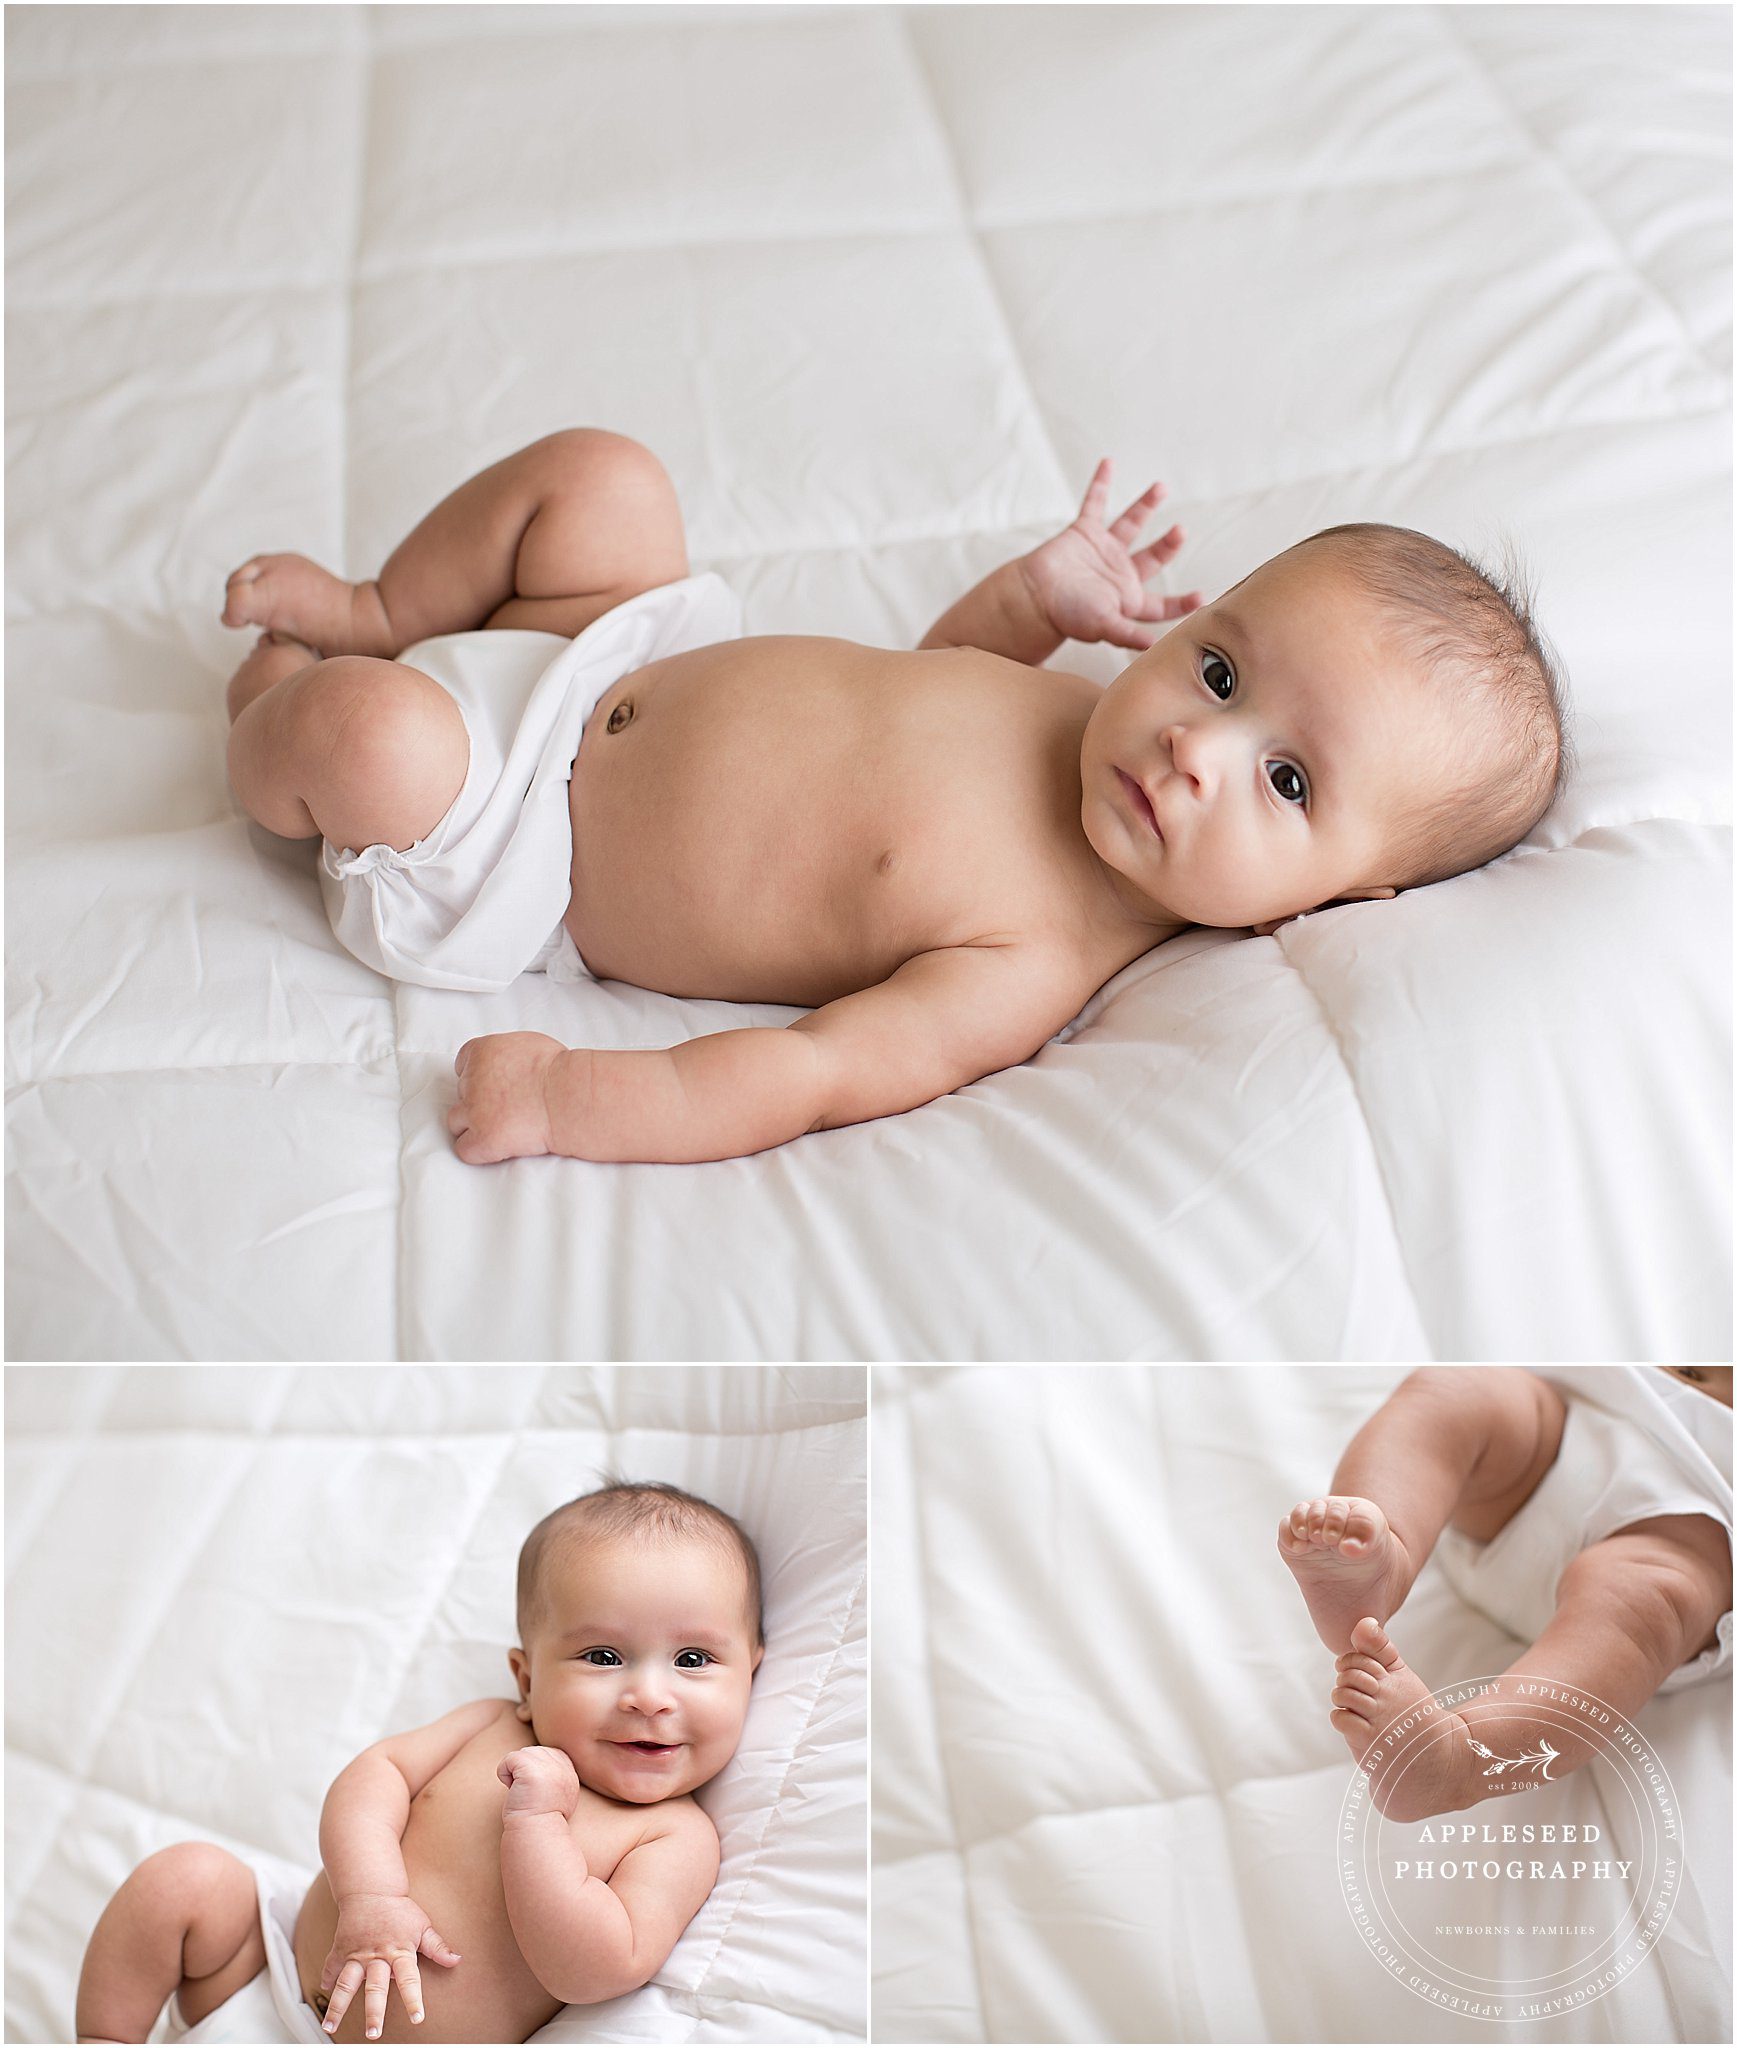 4 Months Old | Atlanta Baby Photographer | Appleseed Photography